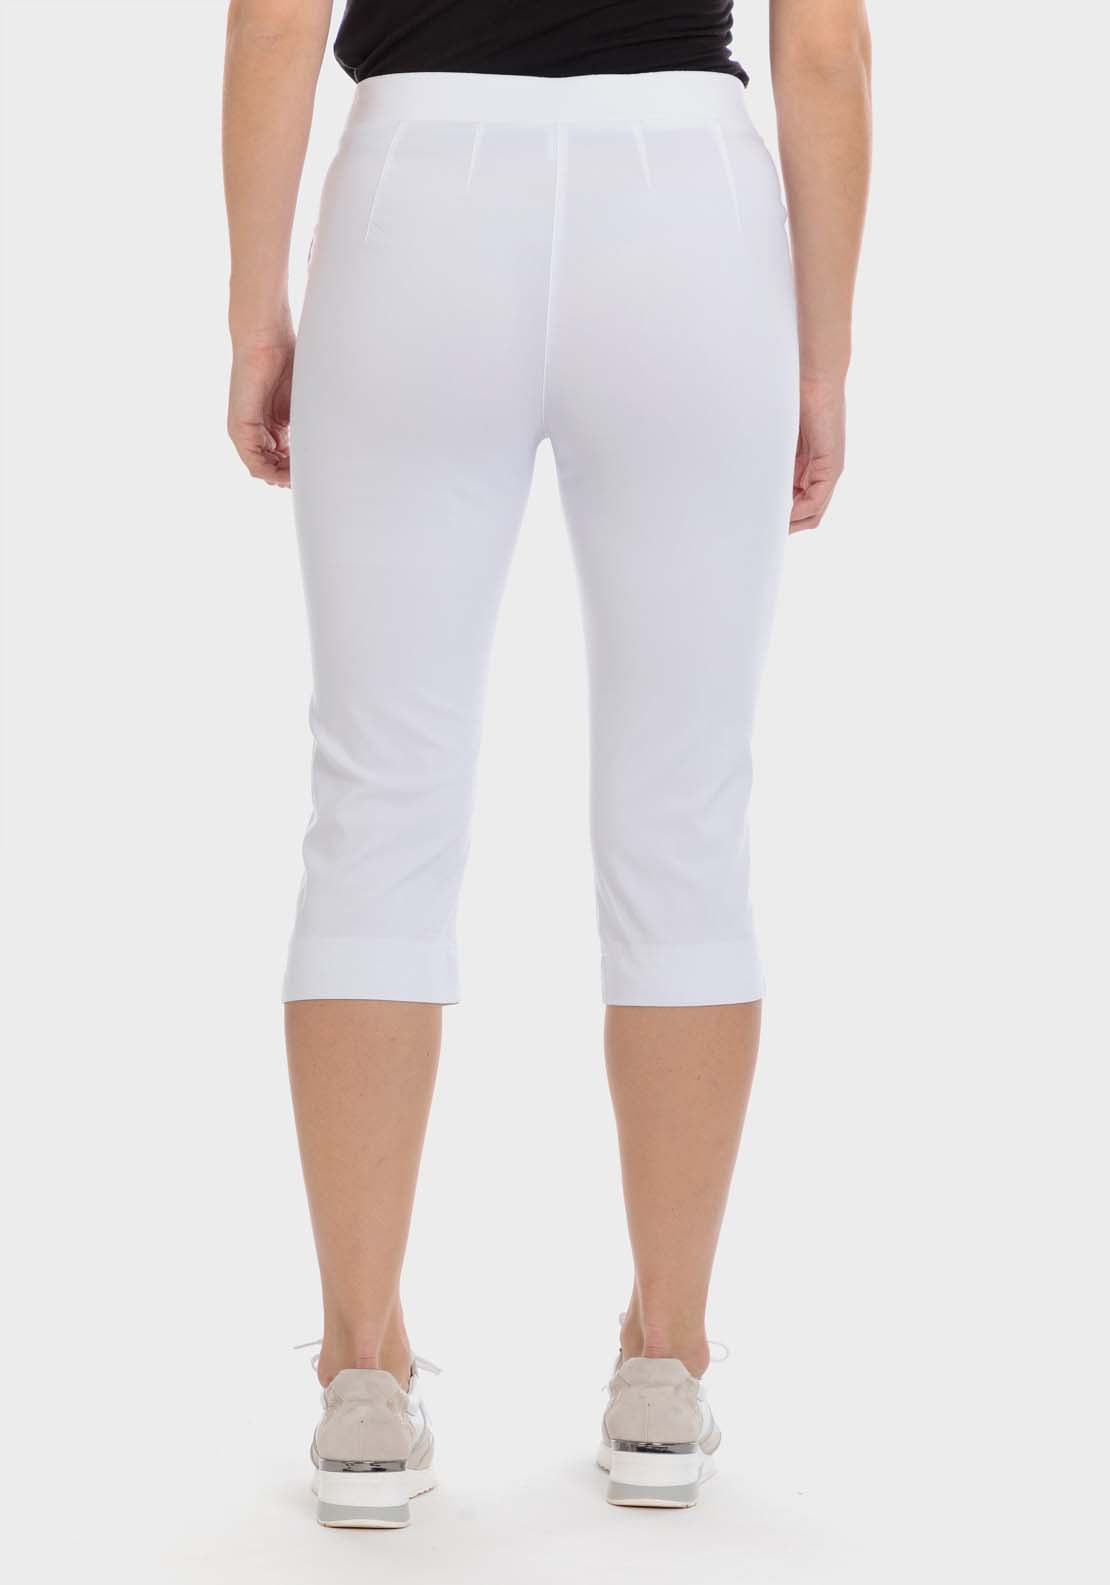 Punt Roma Bengaline Crop Trousers - White 2 Shaws Department Stores